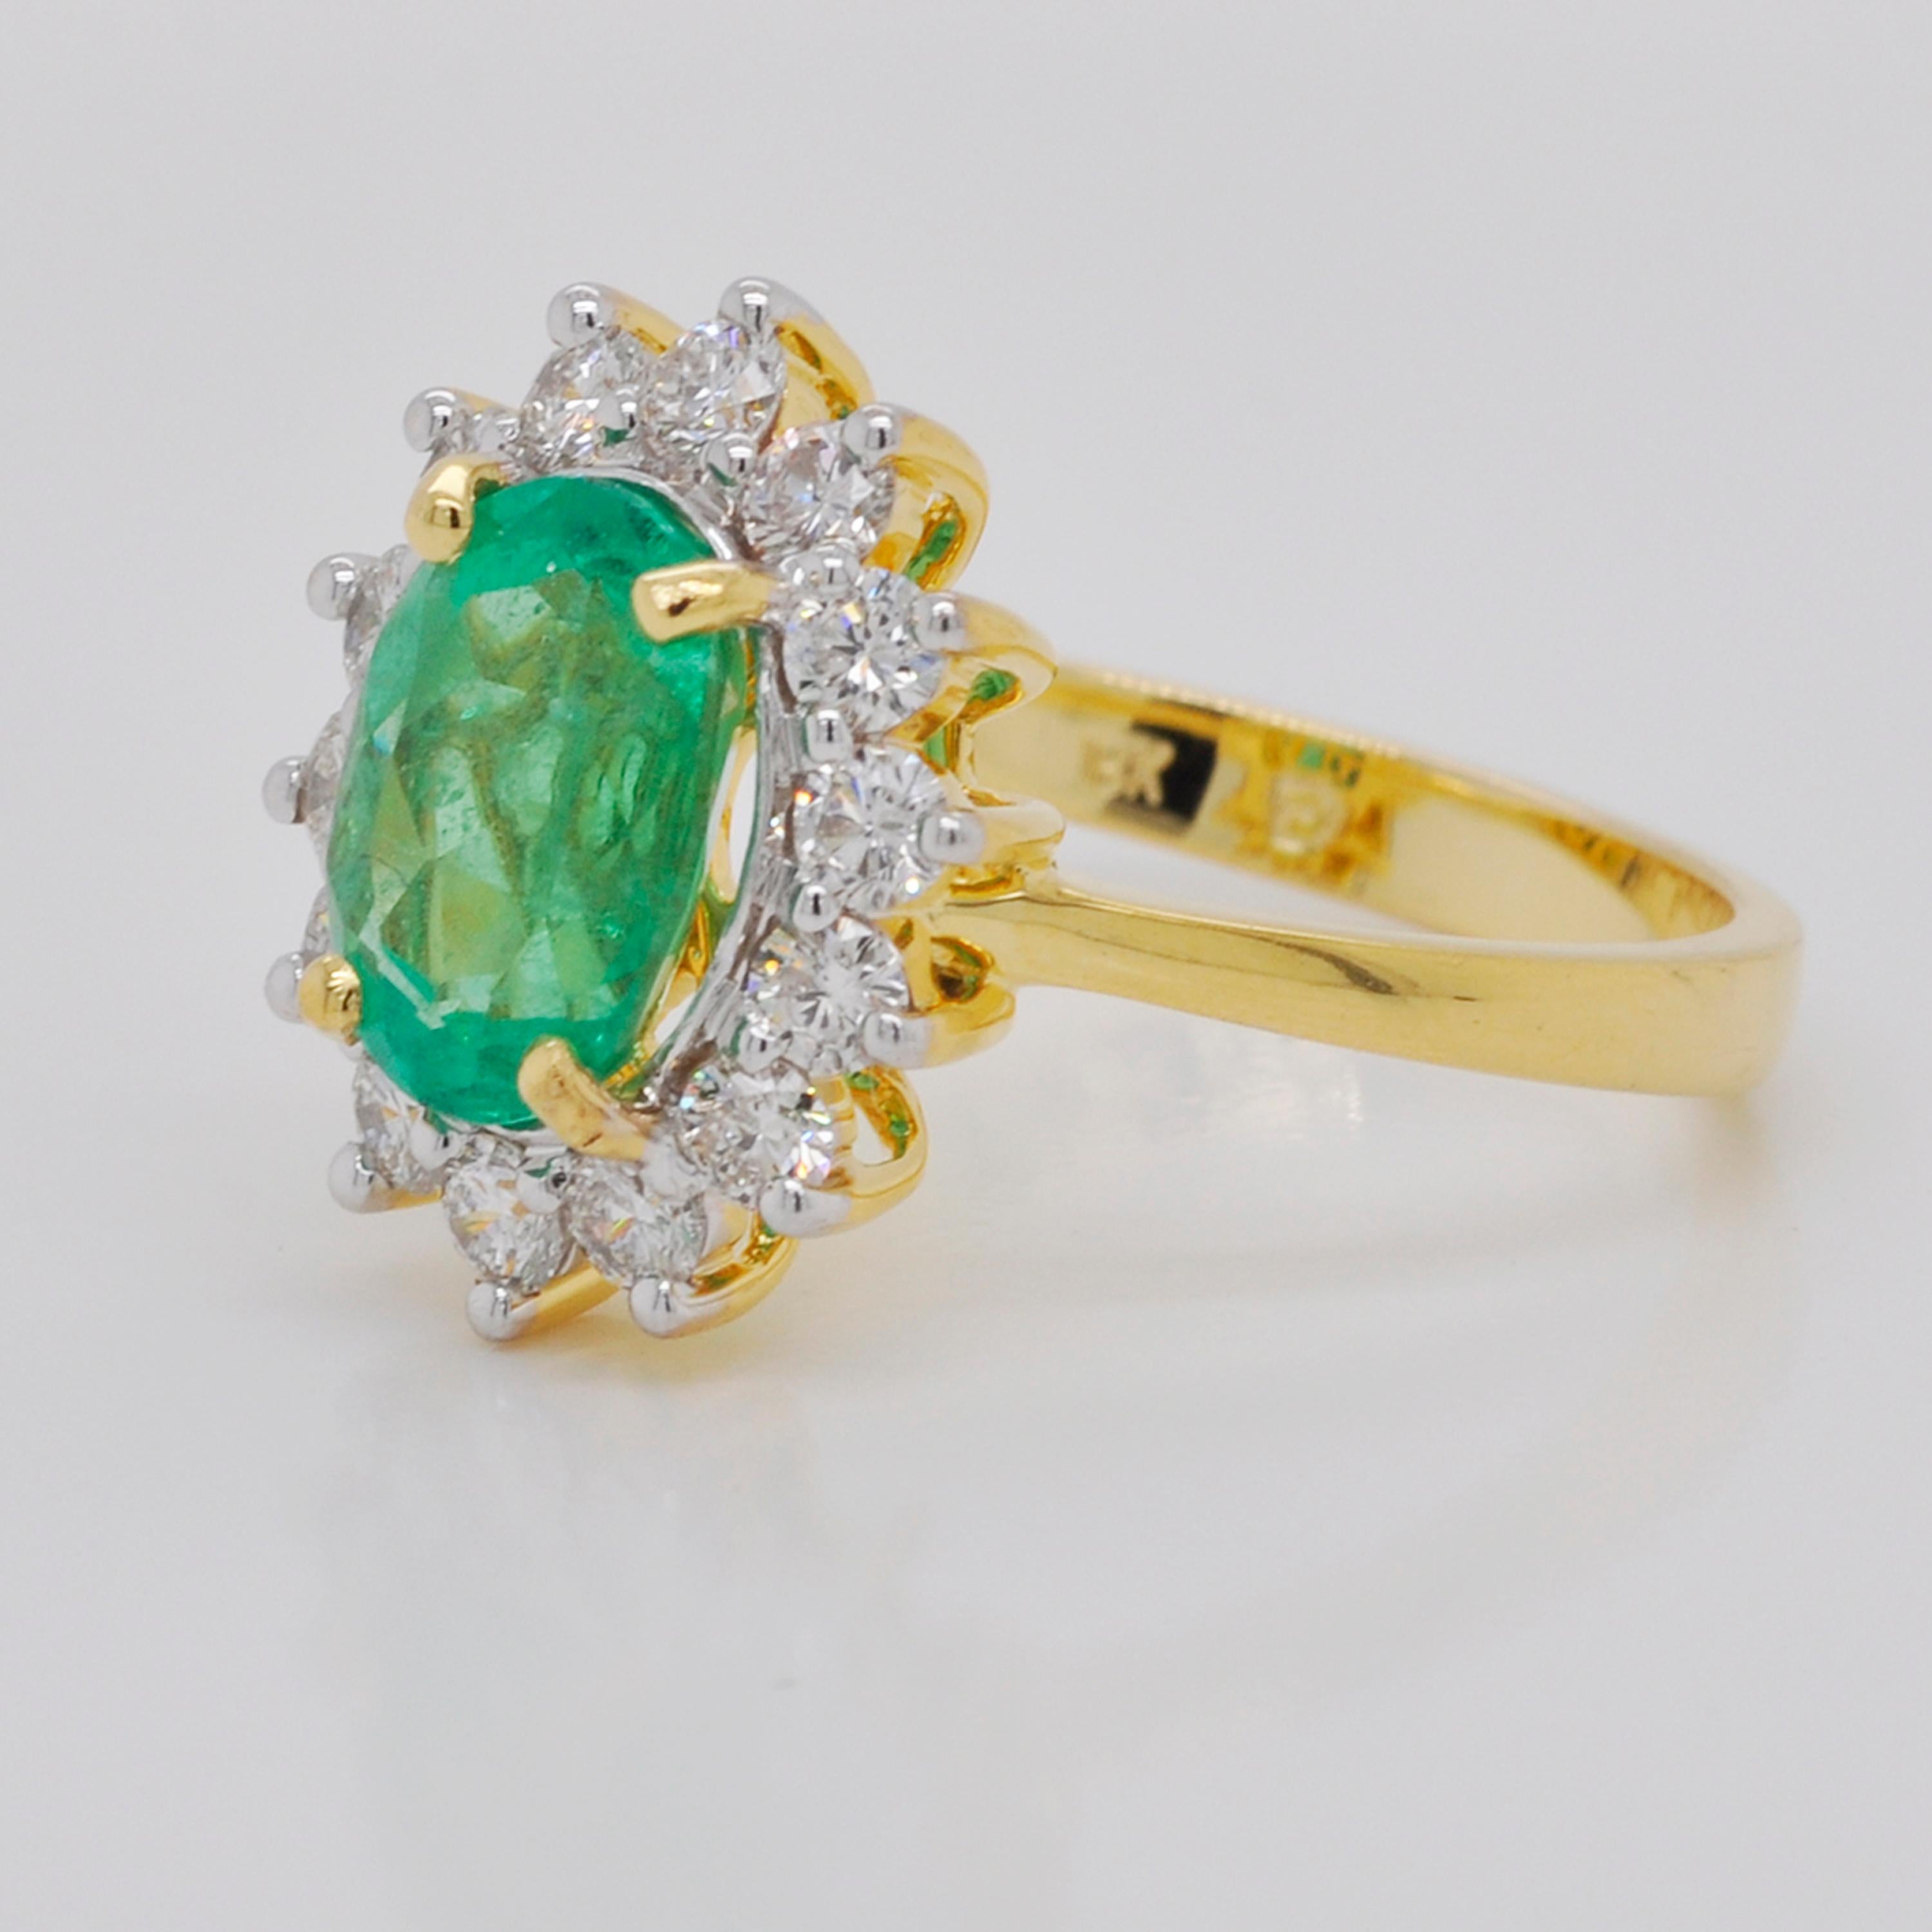 Oval Cut 18 Karat Gold Certified Oval Colombian Emerald Diamond Engagement Ring